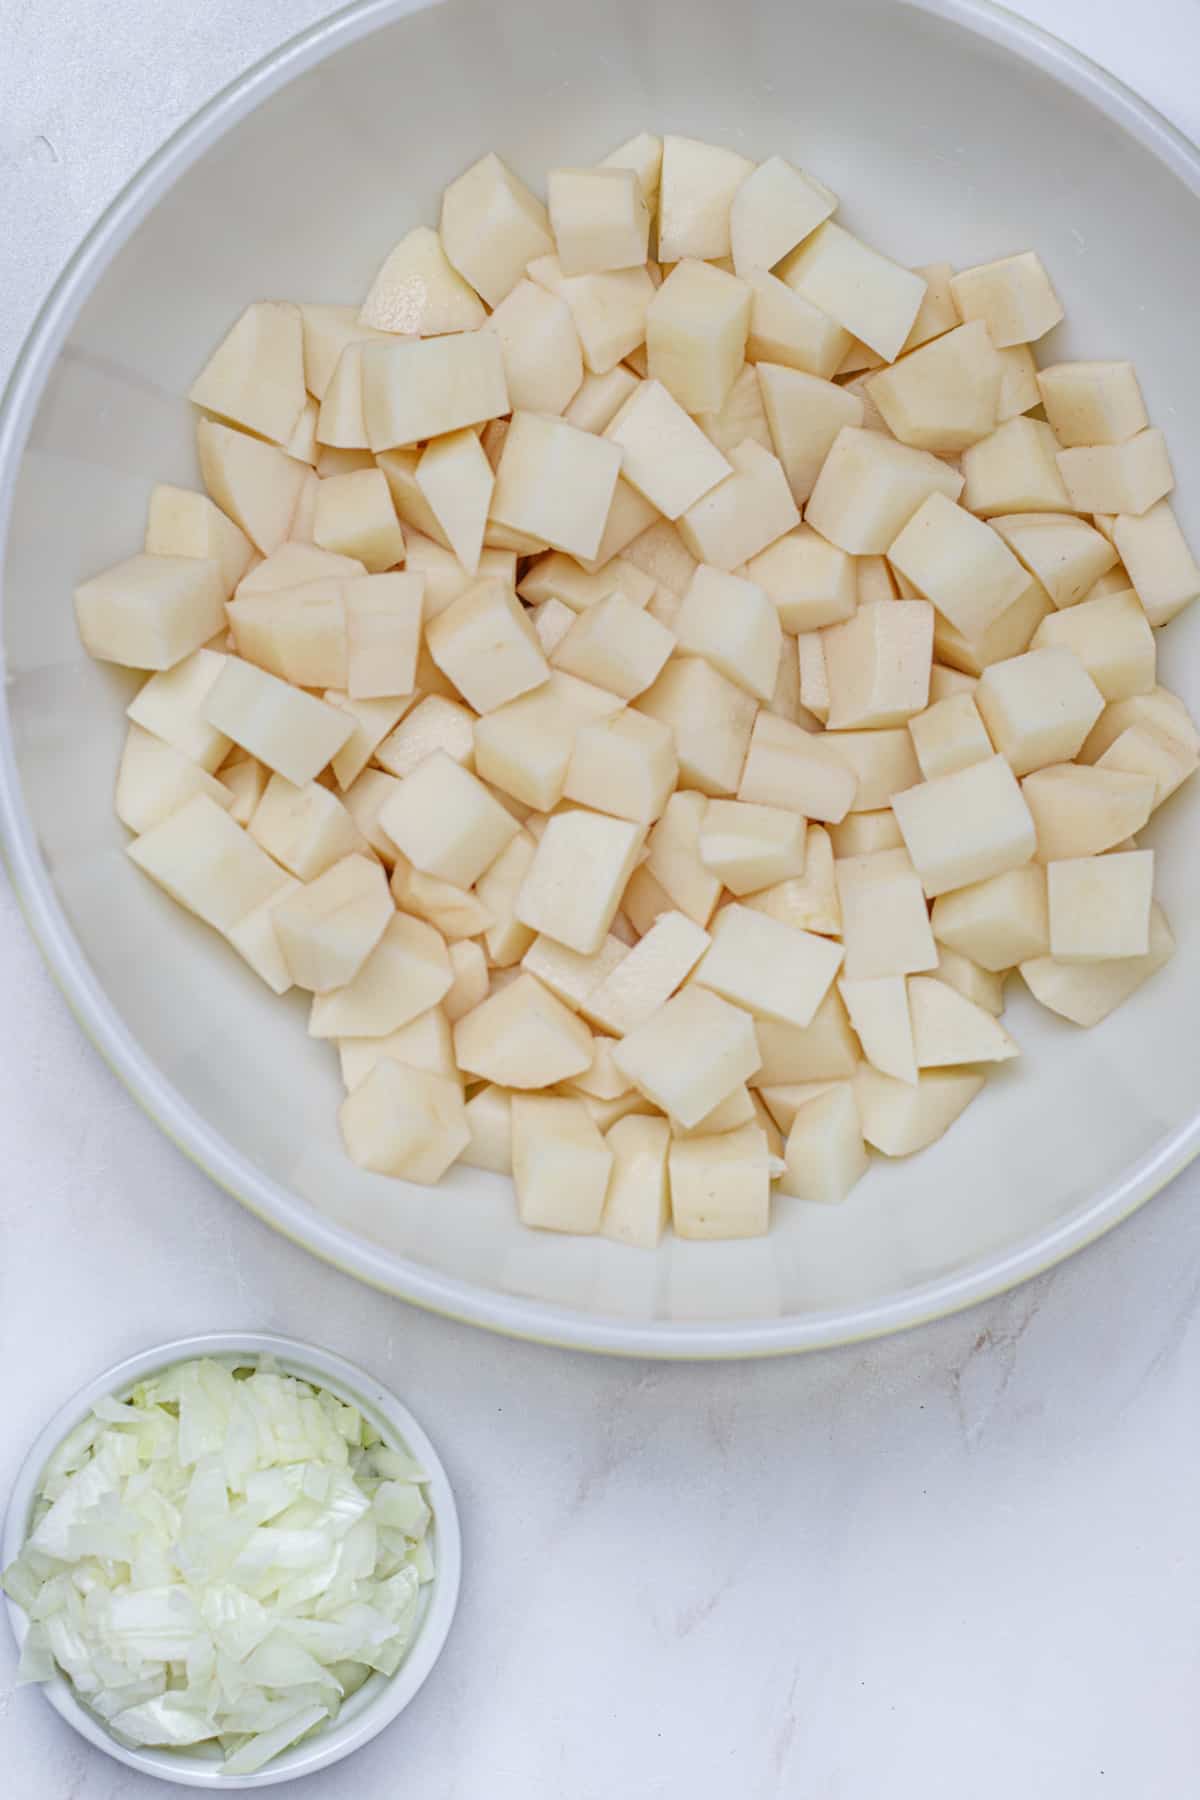 Large bowl of peeled and diced russet potatoes with a small bowl of diced onions in the bottom left corner.